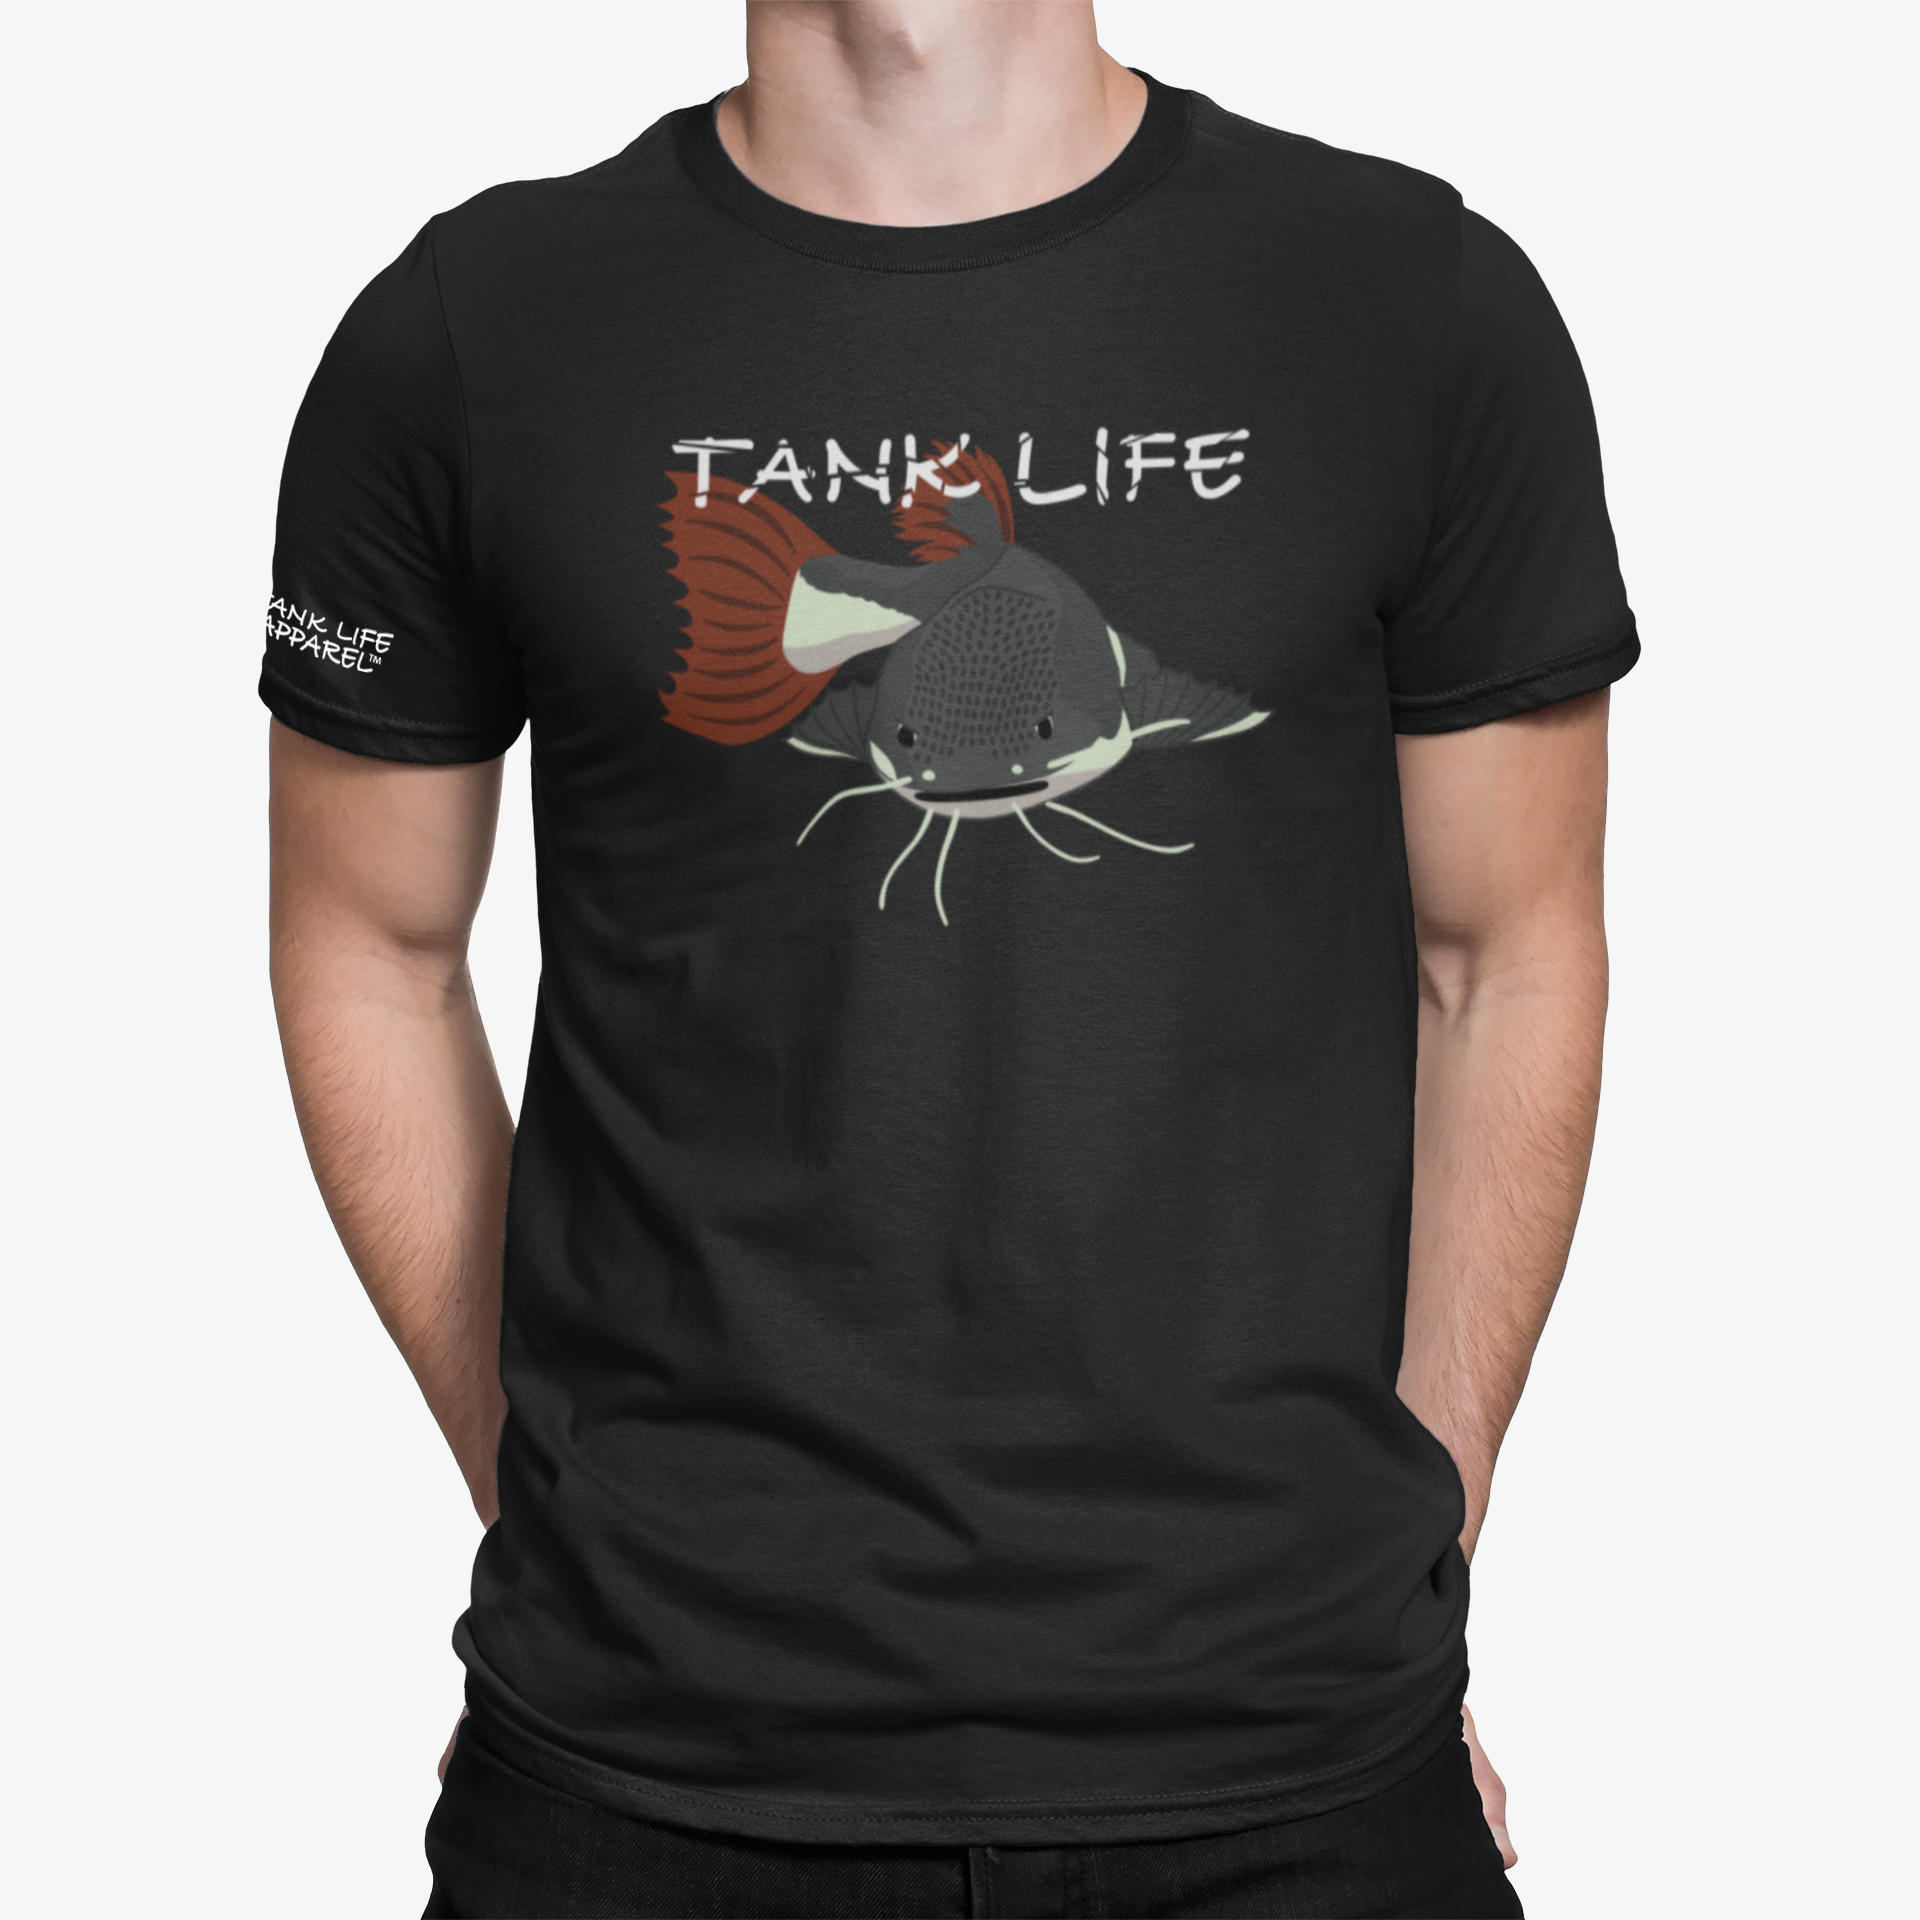 The Tank Life Apparel red tail catfish design on an athletic dri fit performance shirt. Gray catfish with white belly and whiskers and red tail.